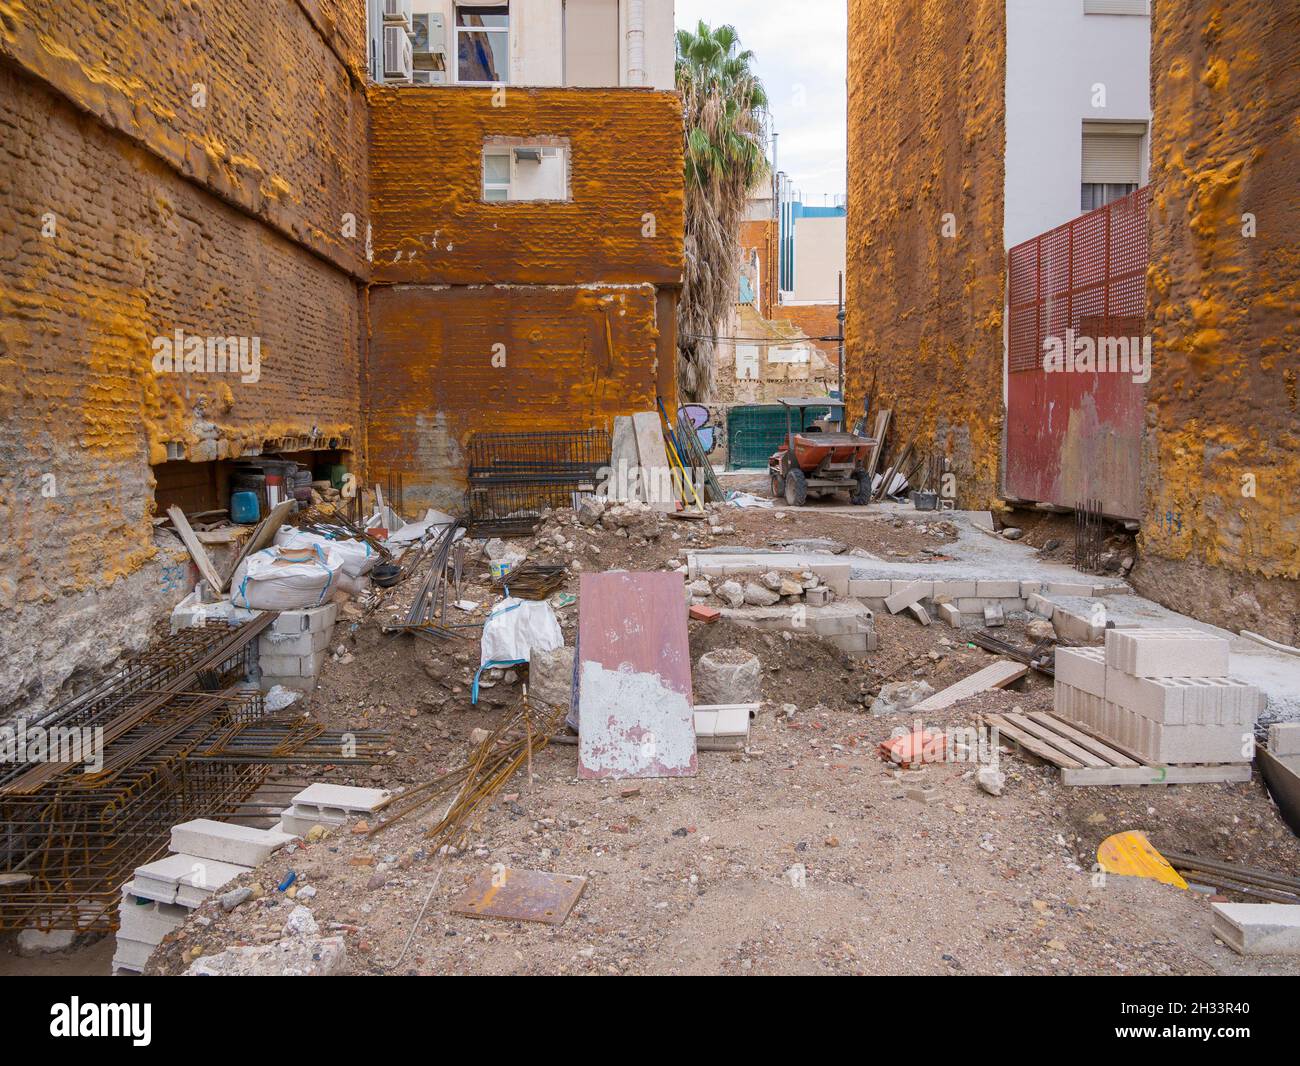 A building site where the foundations are being laid between two apartment blocks in the City of Cartagena, Spain. Stock Photo